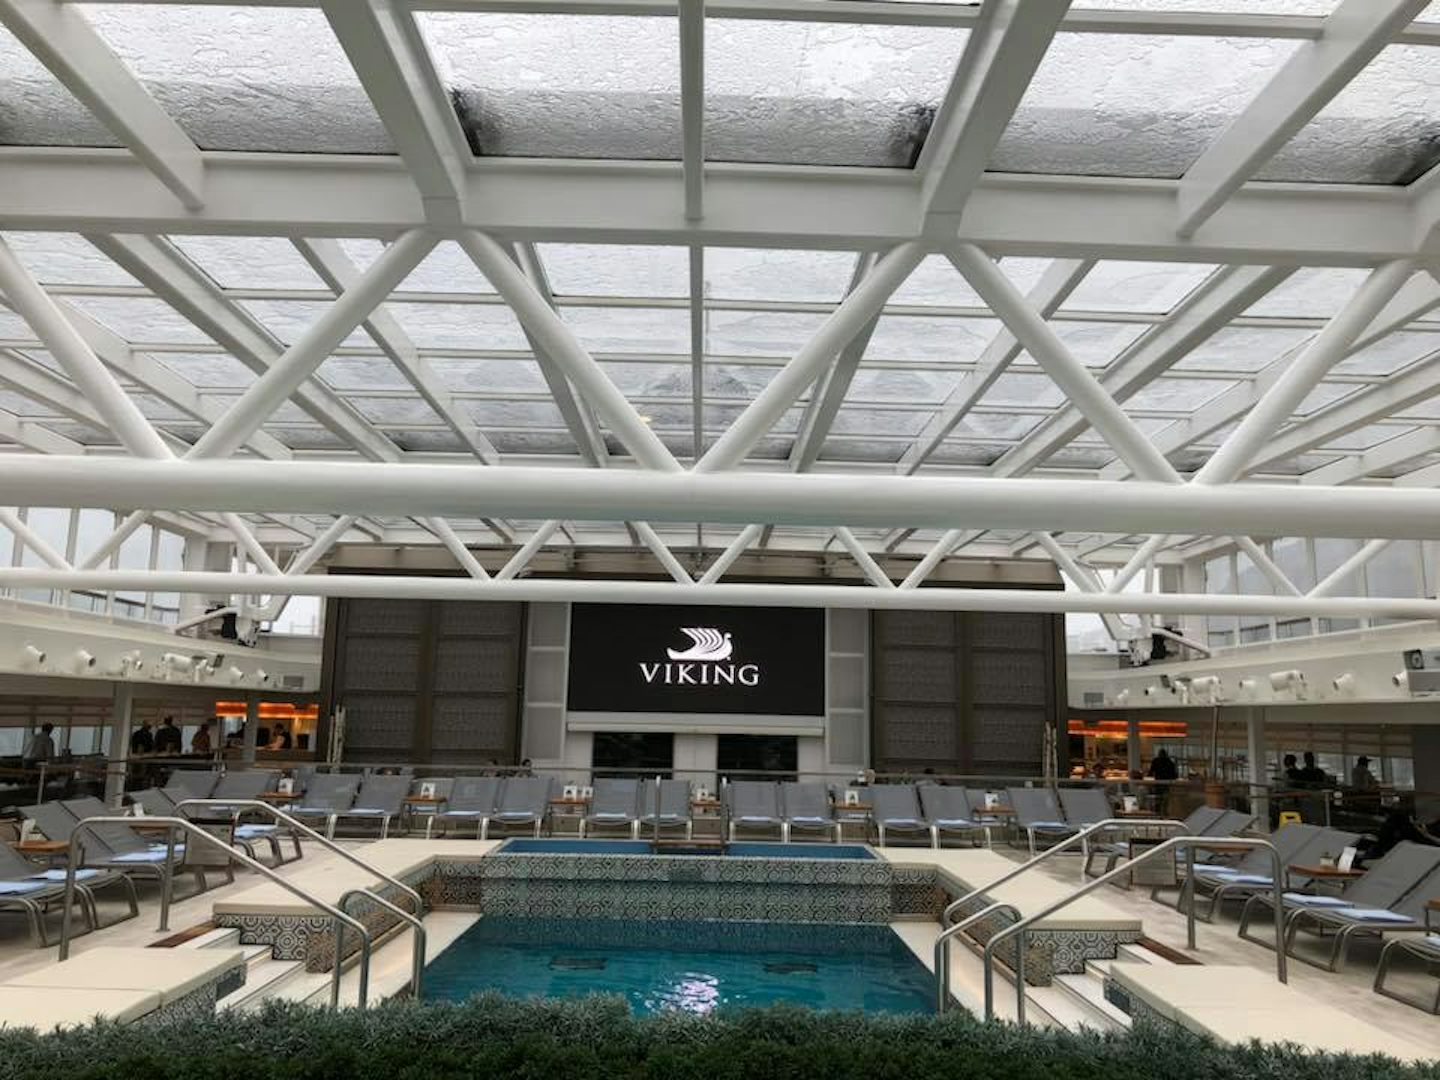 Covered pool. During nice weather, the roof retracts